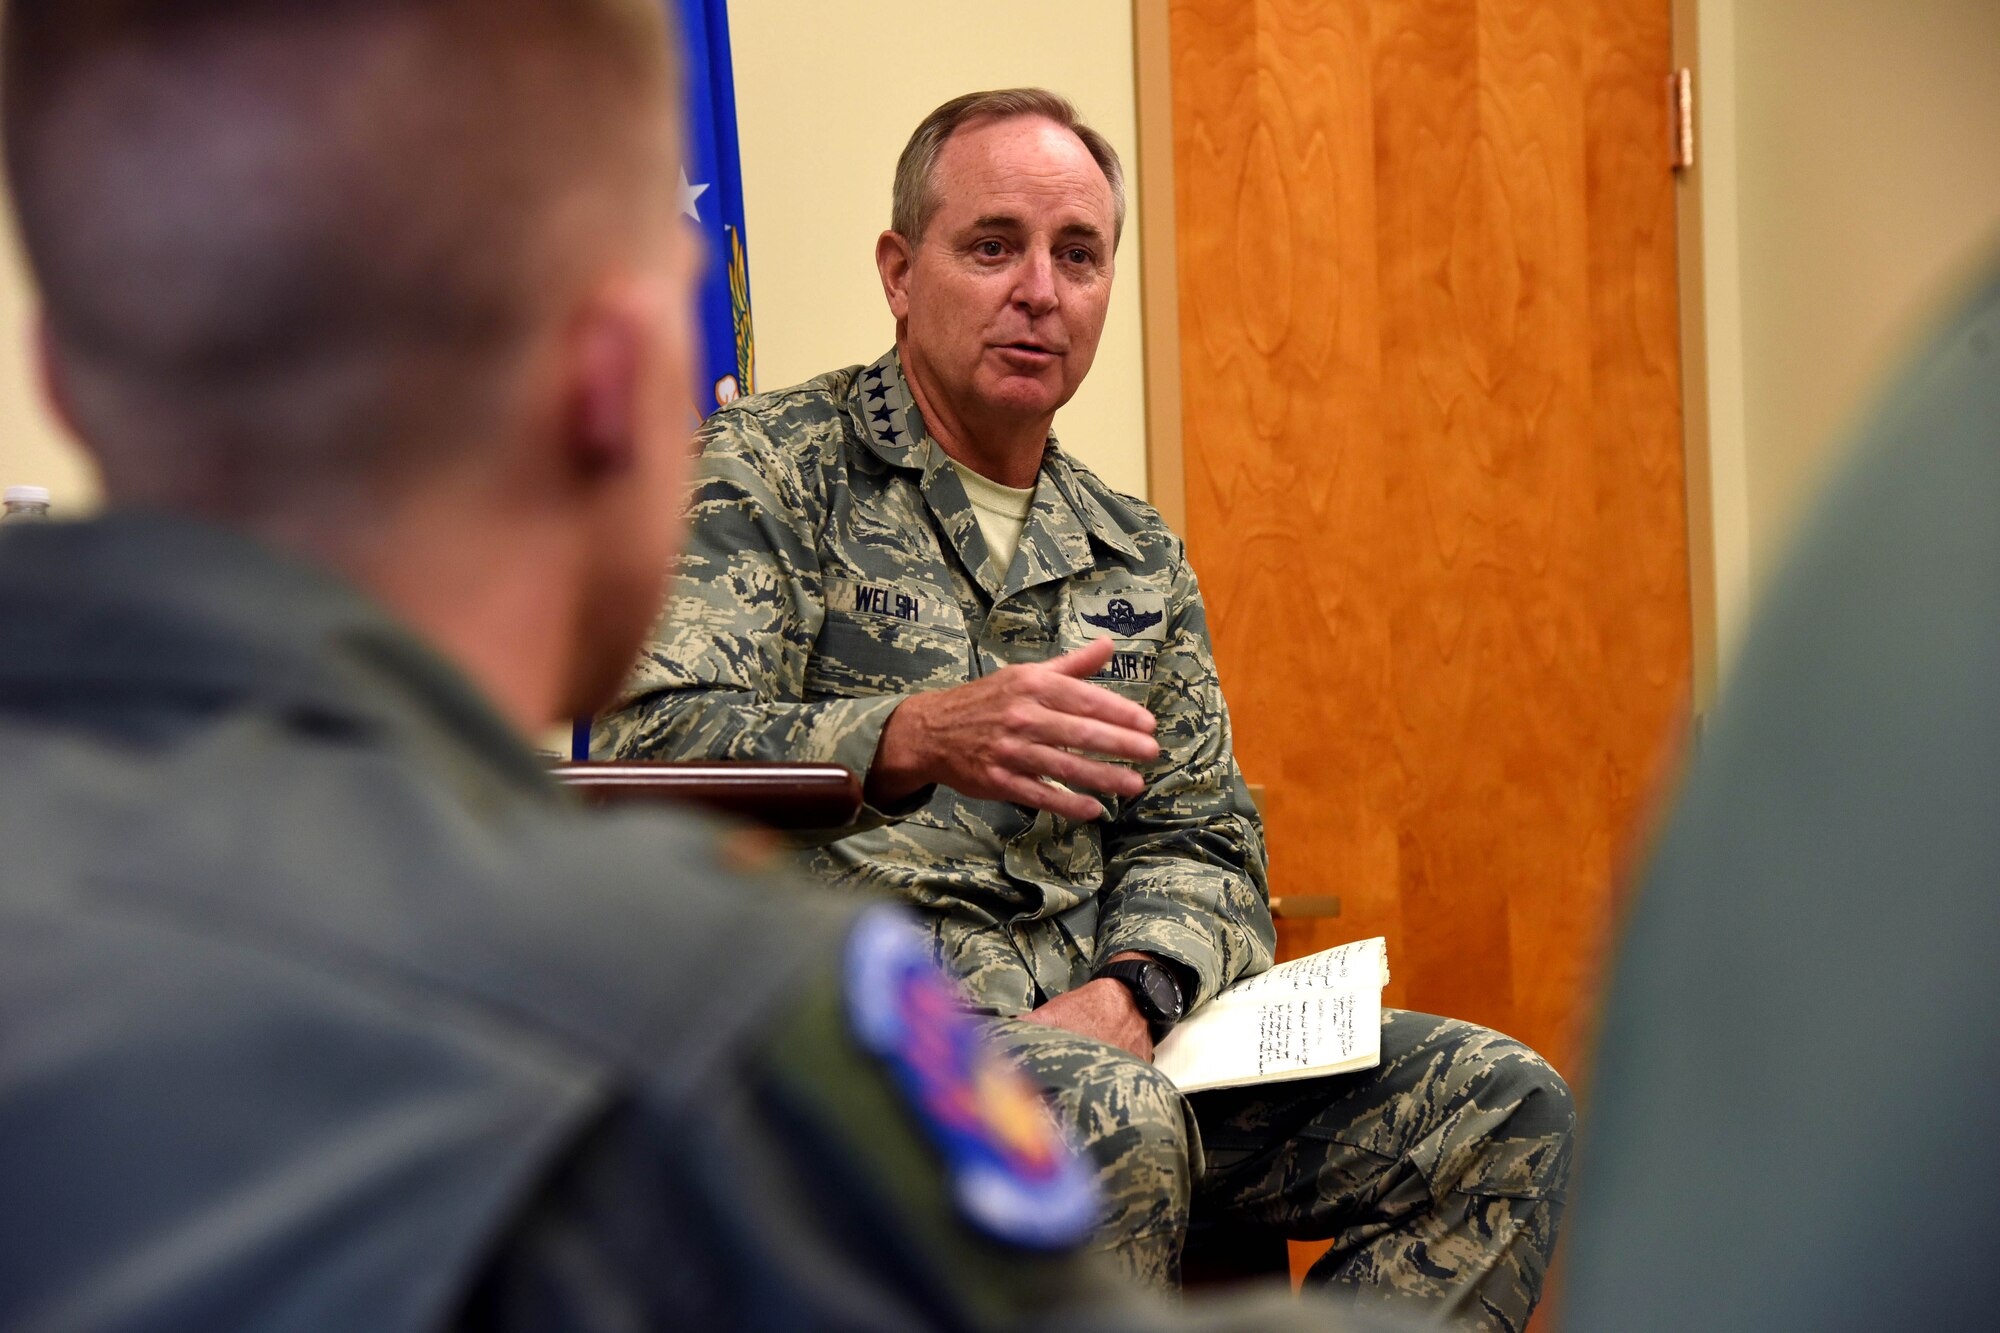 General Mark A. Welsh III, United States Air Force Chief of Staff, visited Malmstrom Air Force Base Aug. 3, 2015, to speak with junior and senior commanders regarding matters of morale and quality of life. During the visit, Welsh heard their opinions on recently implemented changes to the force and what they as local leaders believe is working. (U.S. Air Force photo/Airman 1st Class Collin Schmidt)